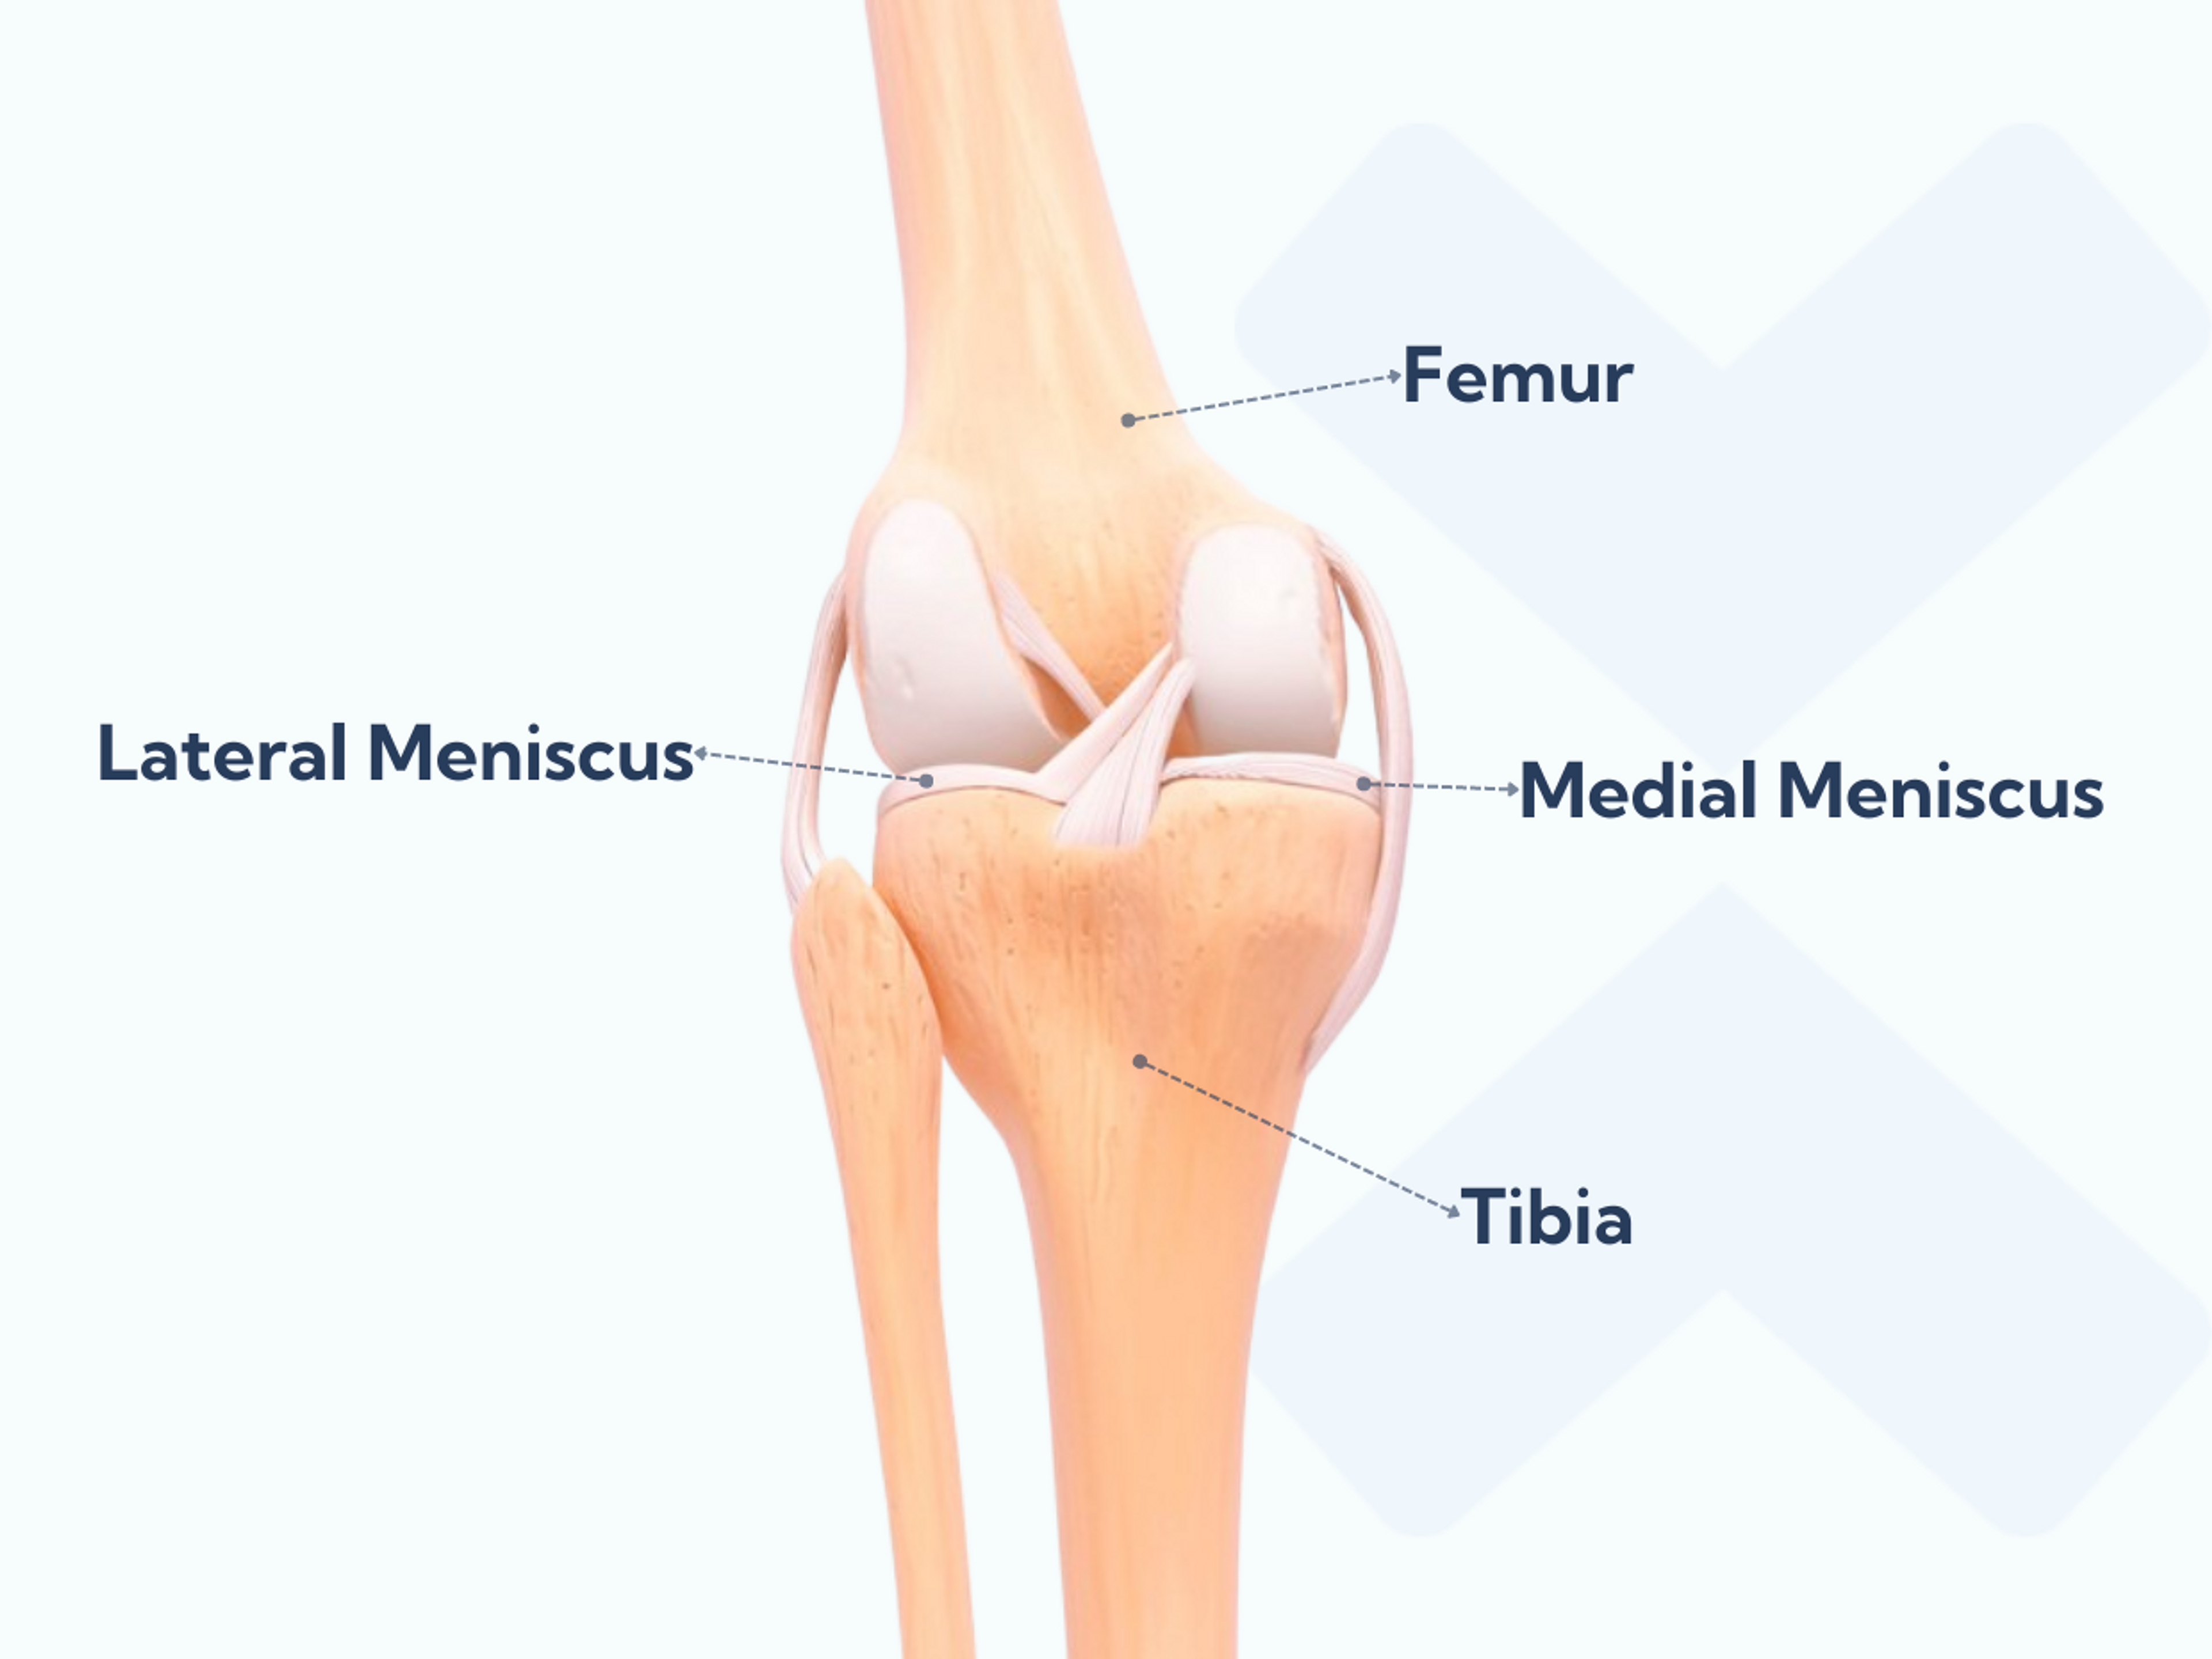 Anatomy of the knee showing the medial and lateral meniscus